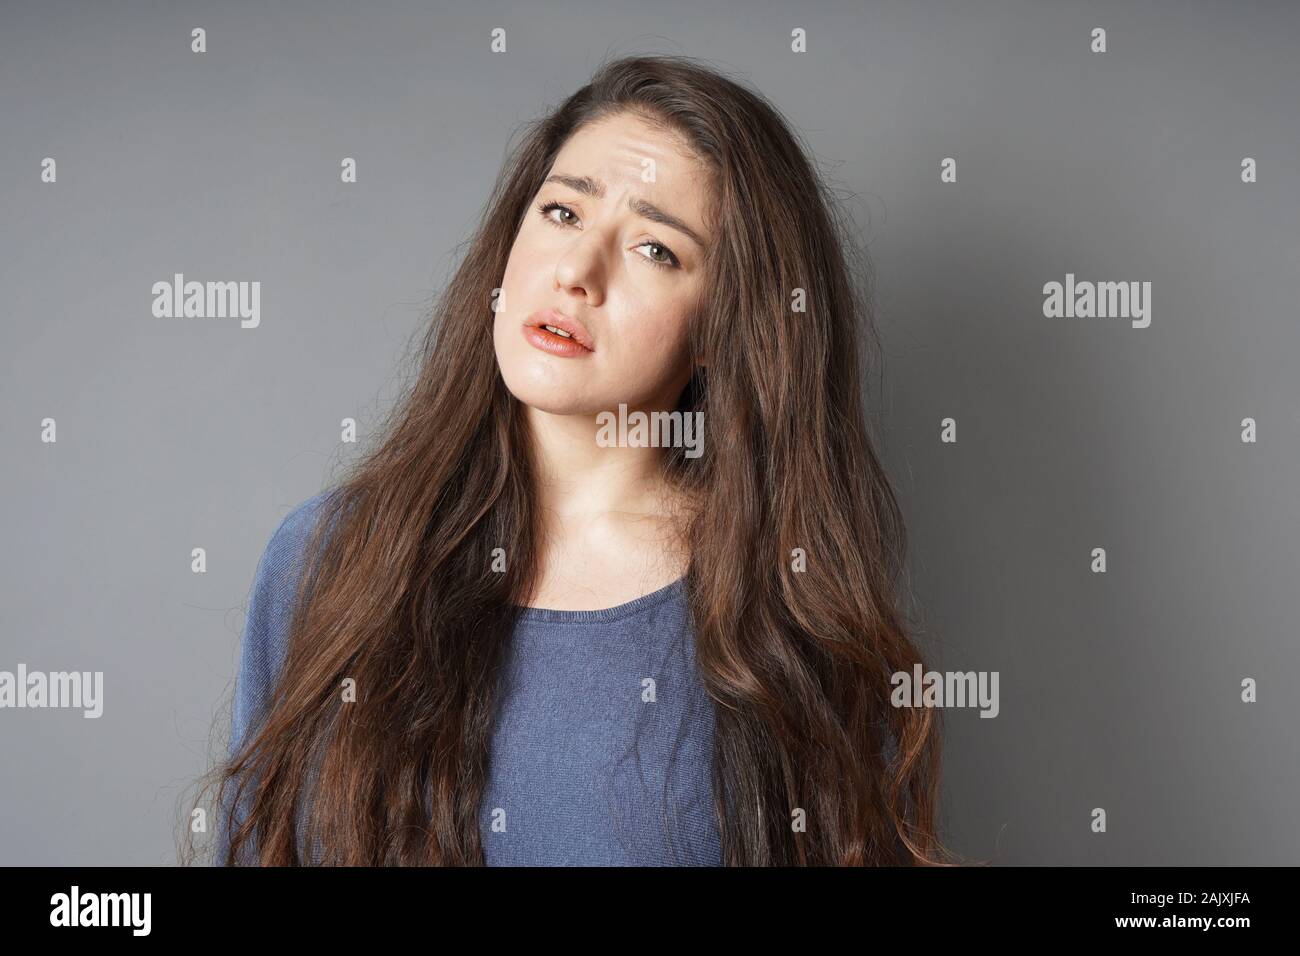 unhappy sad young woman worried and frowning Stock Photo